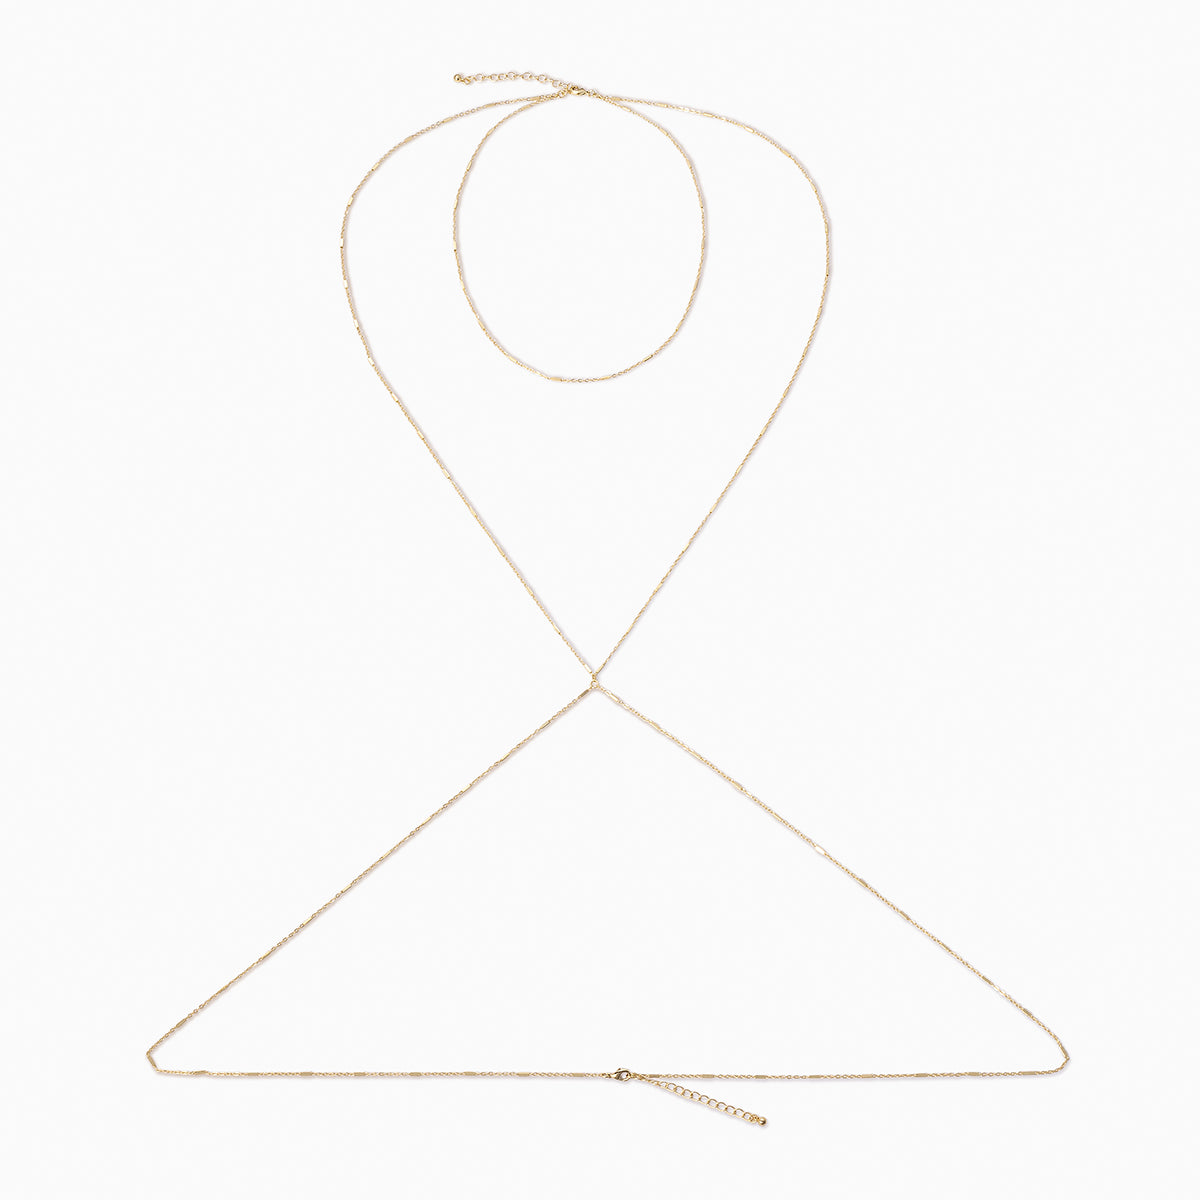 Summer Body Chain | Gold | Product Image | Uncommon James